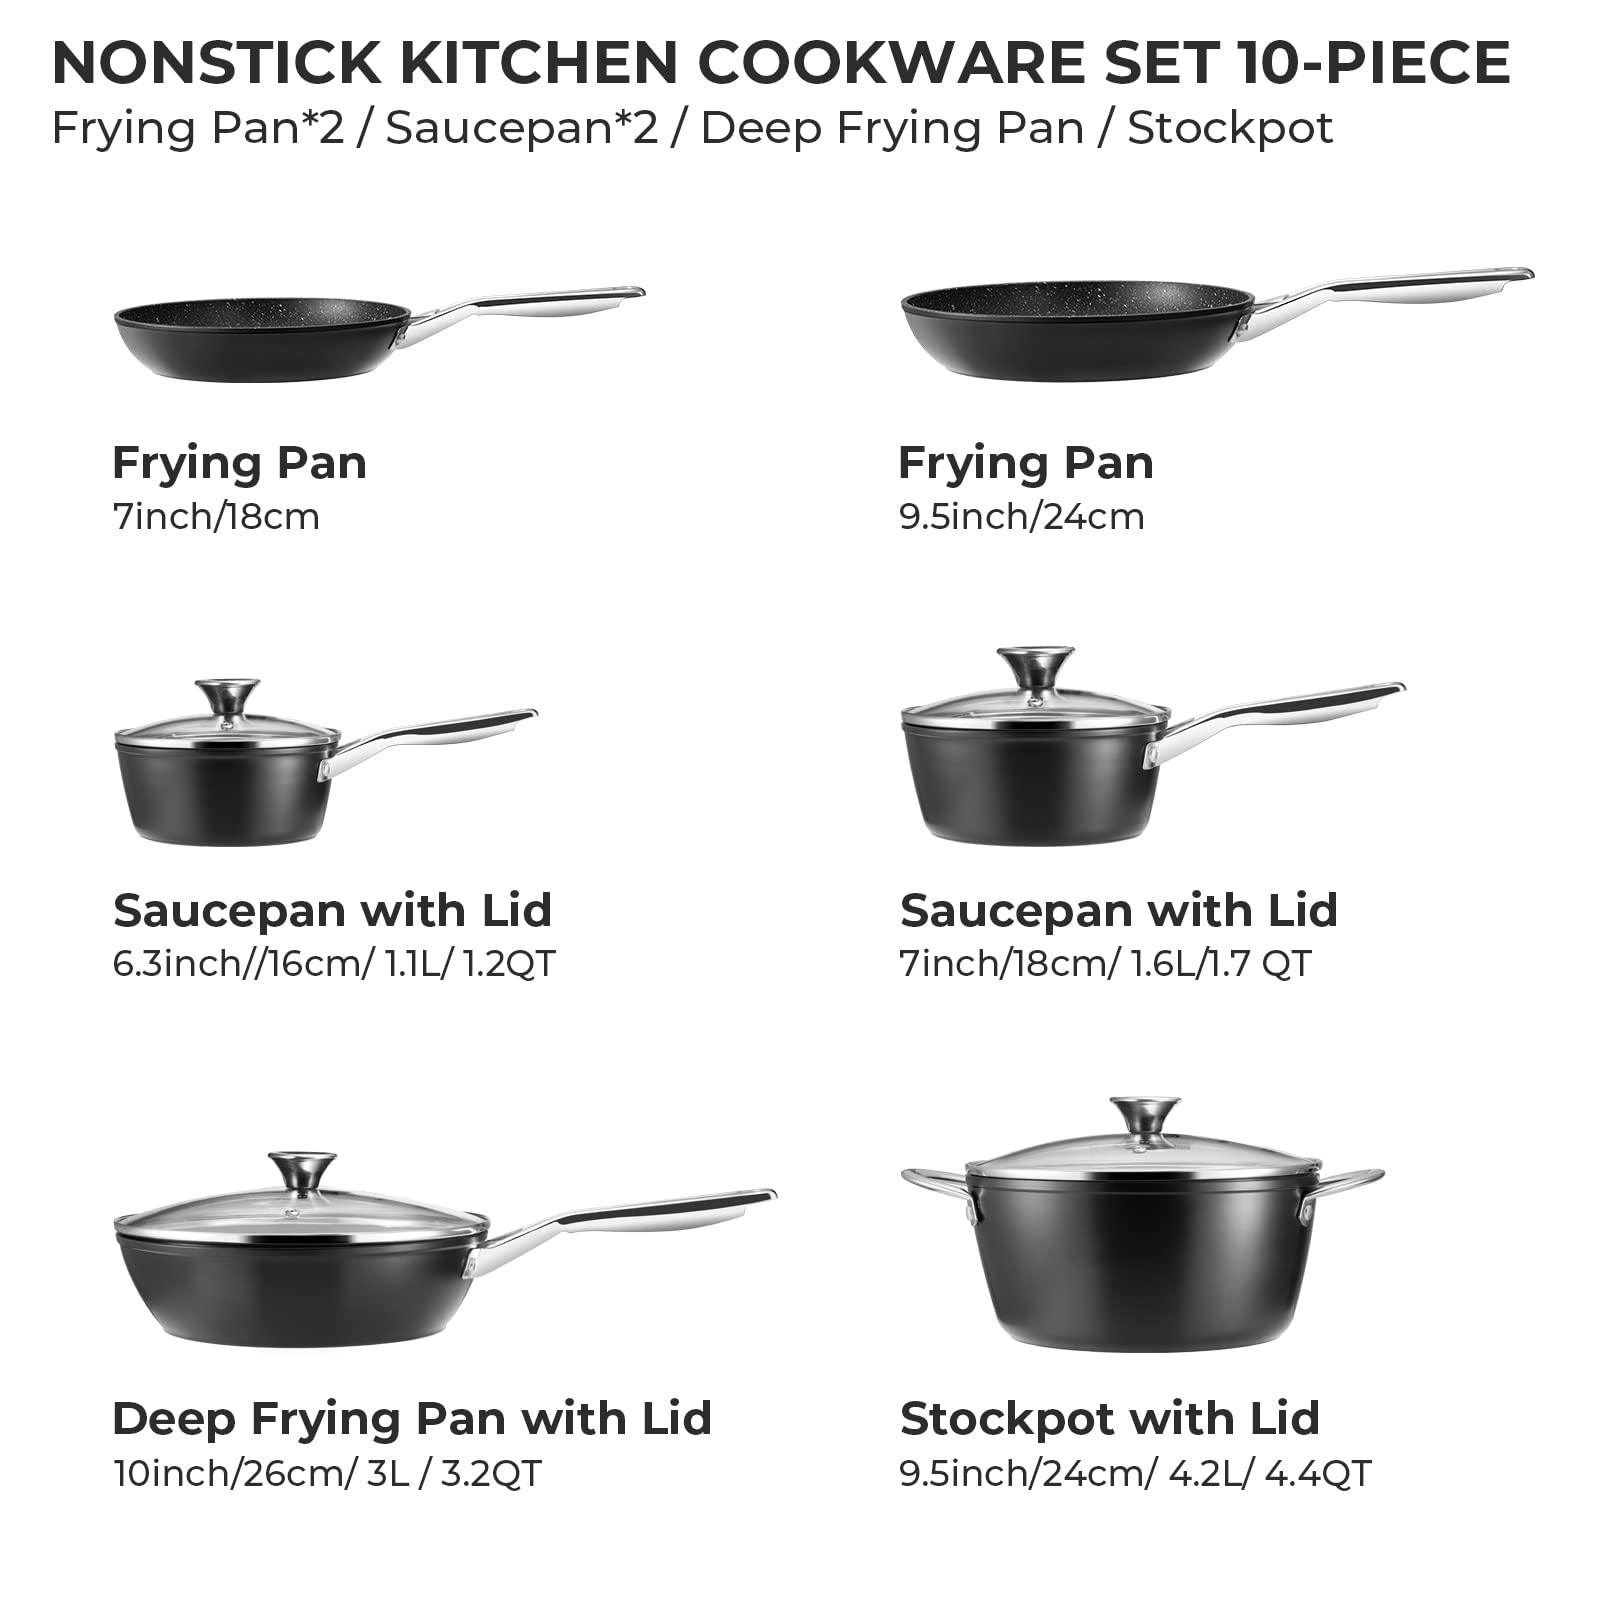 Induction Cookware Set, Fadware Pots and Pans Set Nonstick, Dishwasher Safe Pan Sets for Cooking, Utensils Set w/Frying Pans, Saucepans & Stockpot, Kitchen Essentials for New Home, Black - CookCave